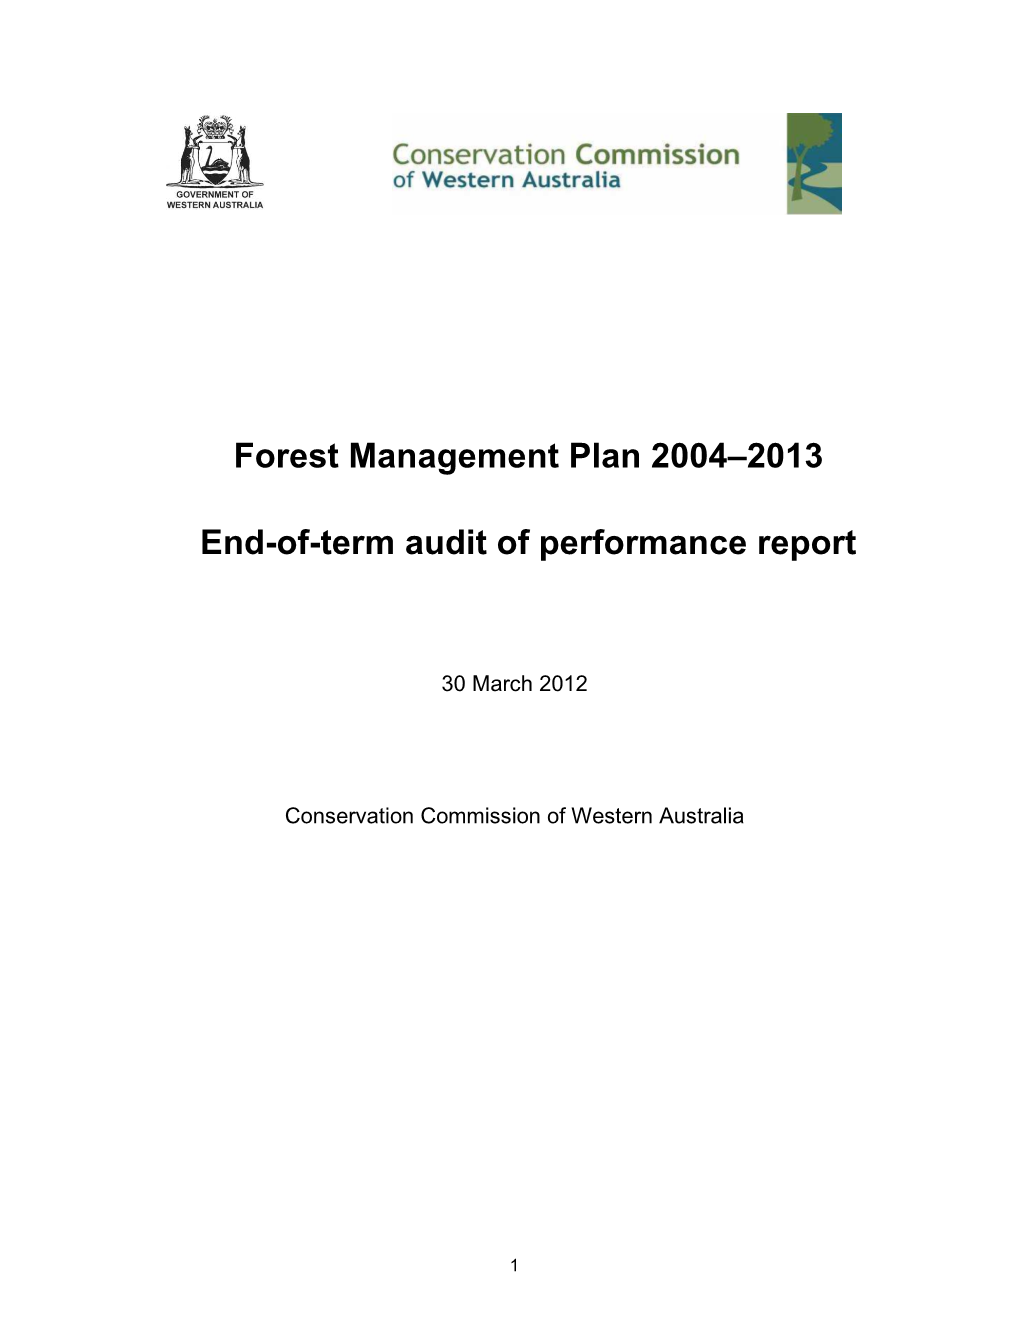 Forest Management Plan 2004–2013 End-Of-Term Audit of Performance